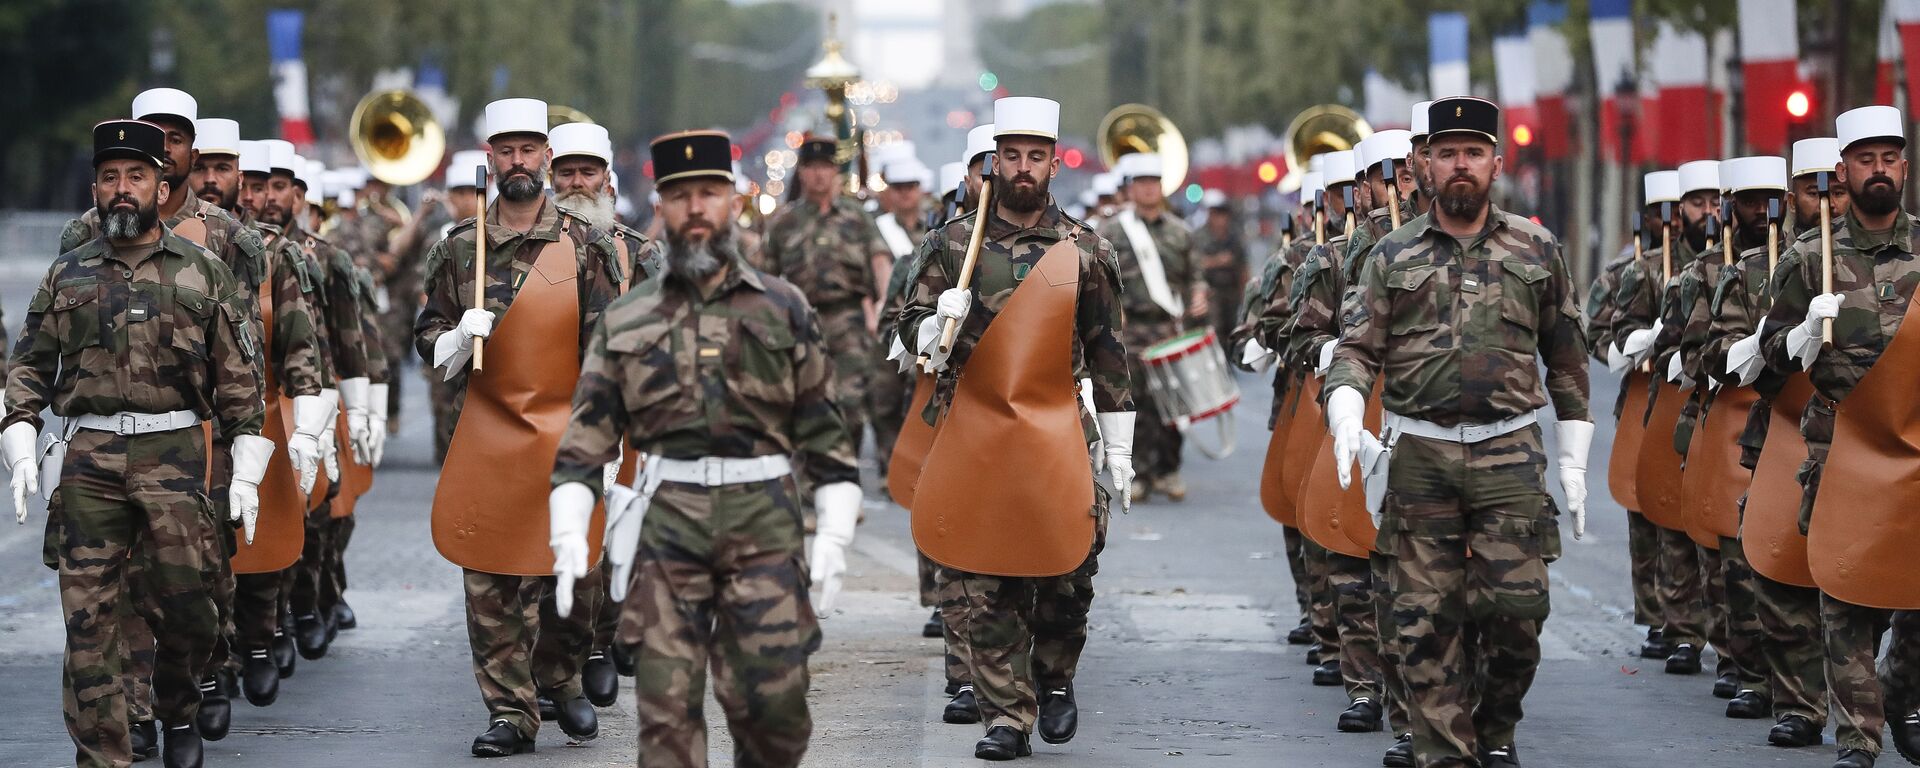 Soldiers of the French Foreign Legion parade on the Champs Elysees avenue during a rehearsal for Bastille Day, early Wednesday, July 11, 2018 in Paris - Sputnik International, 1920, 23.08.2022